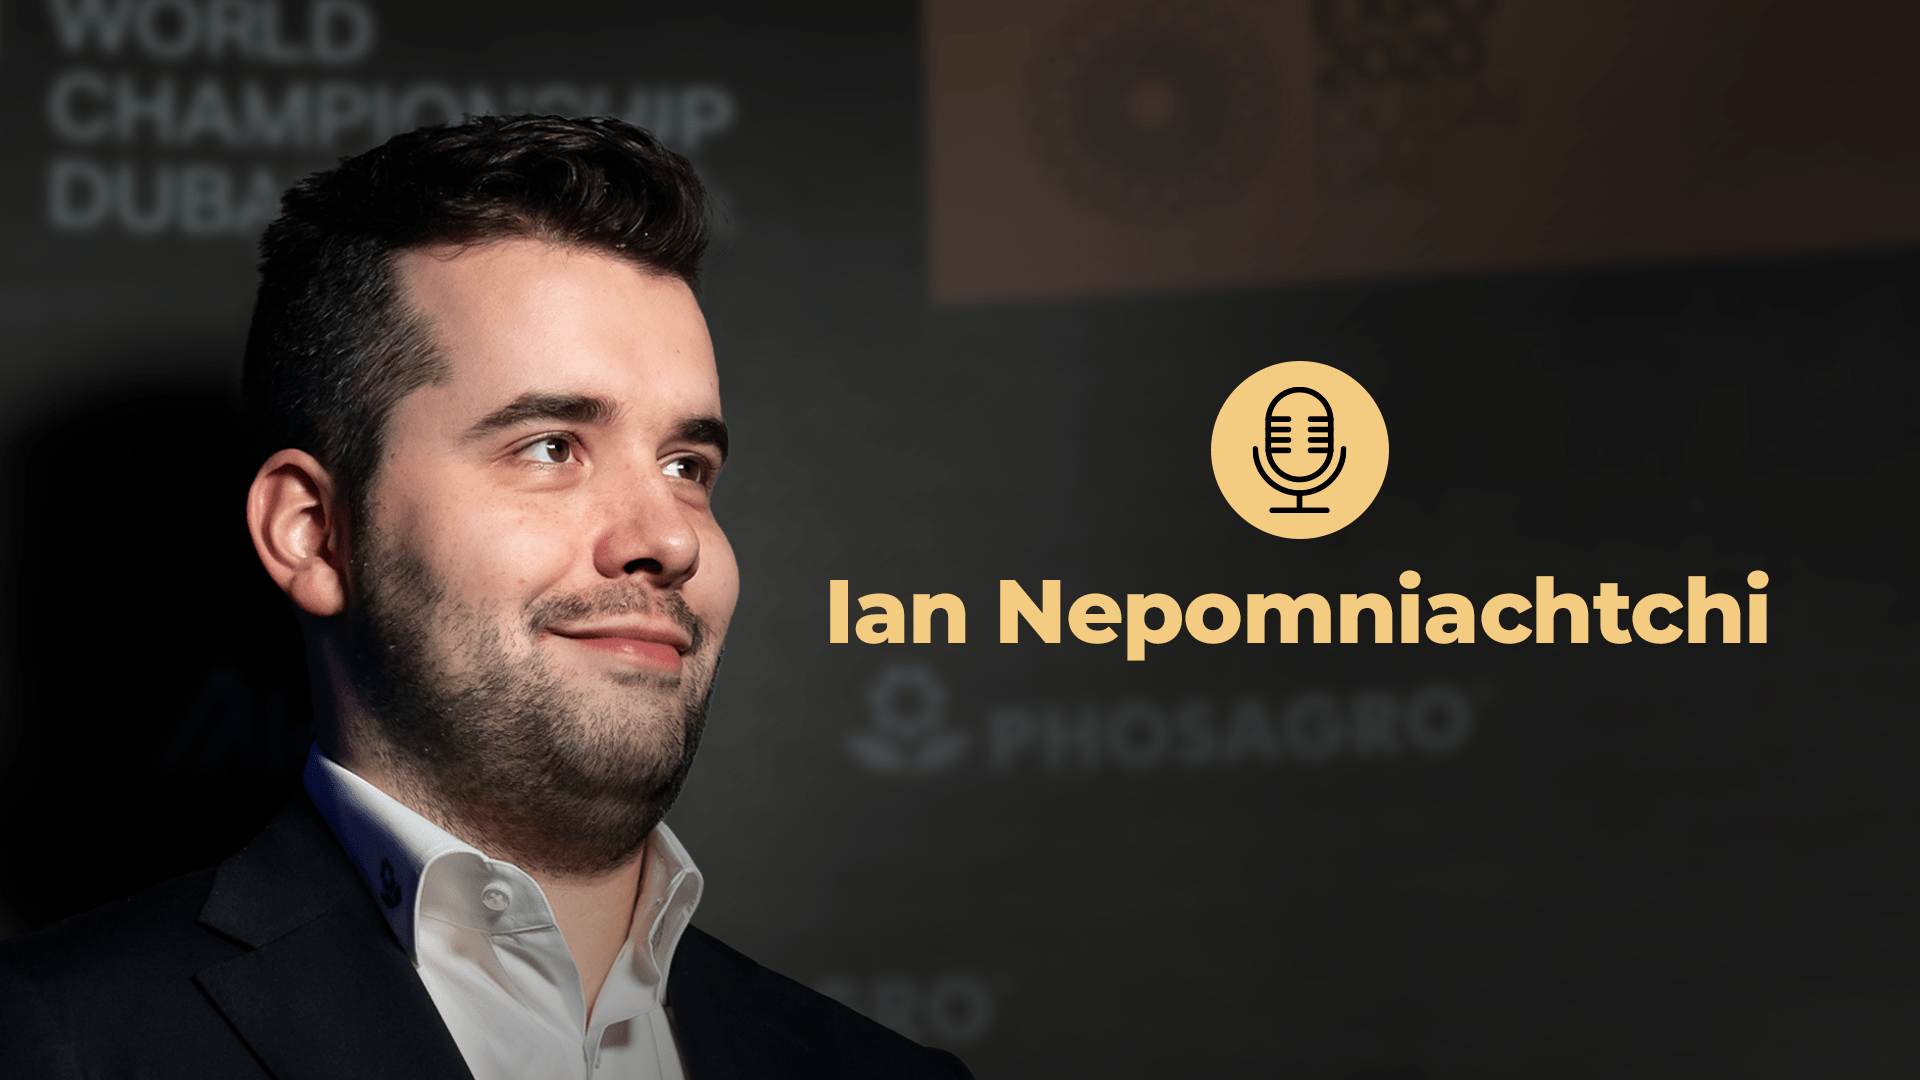 Ian Nepomniachtchi: They are trying to break my belief in